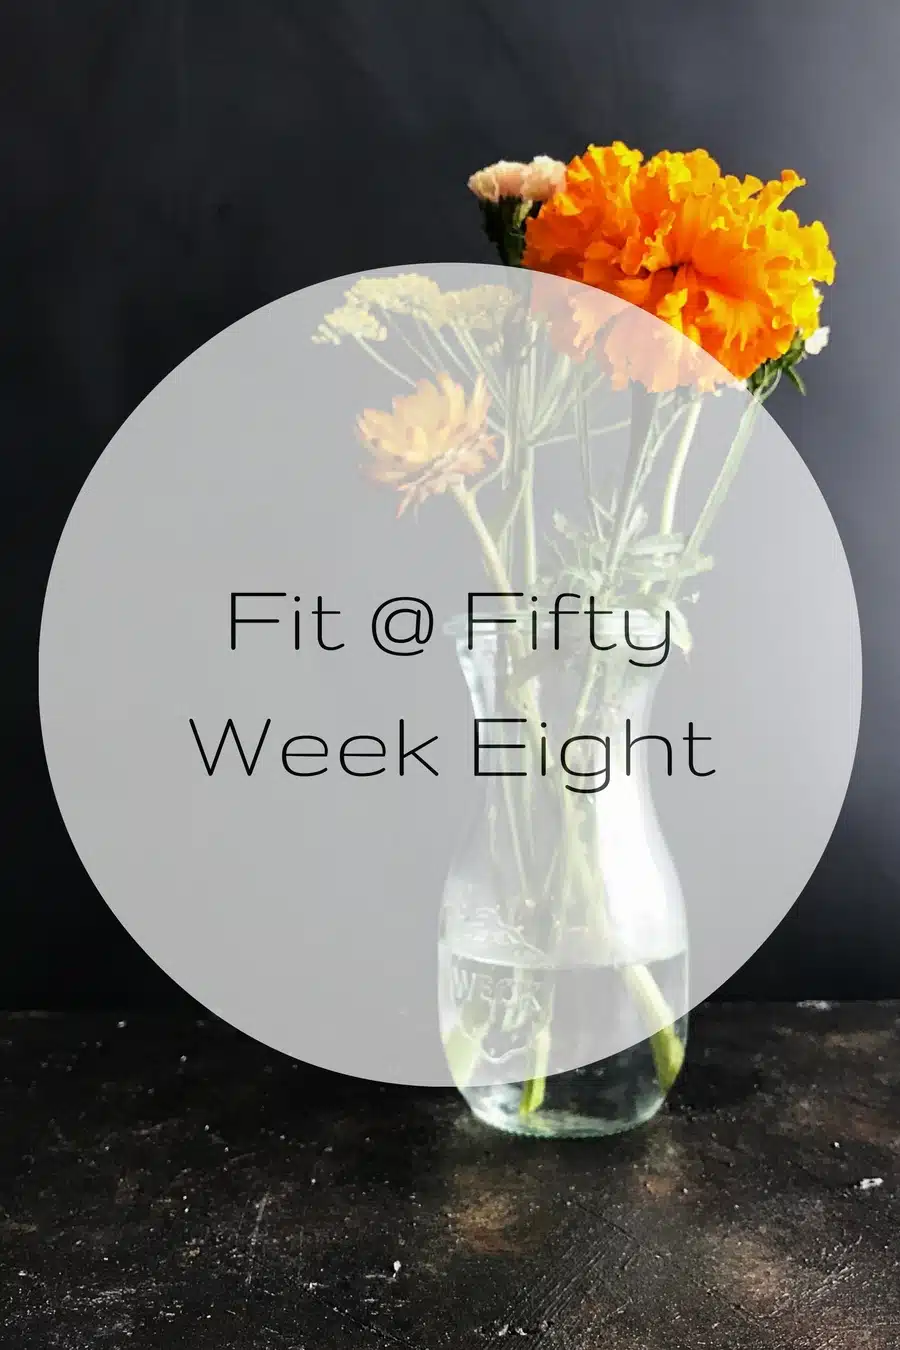 Fifty at Fifty Week Eight